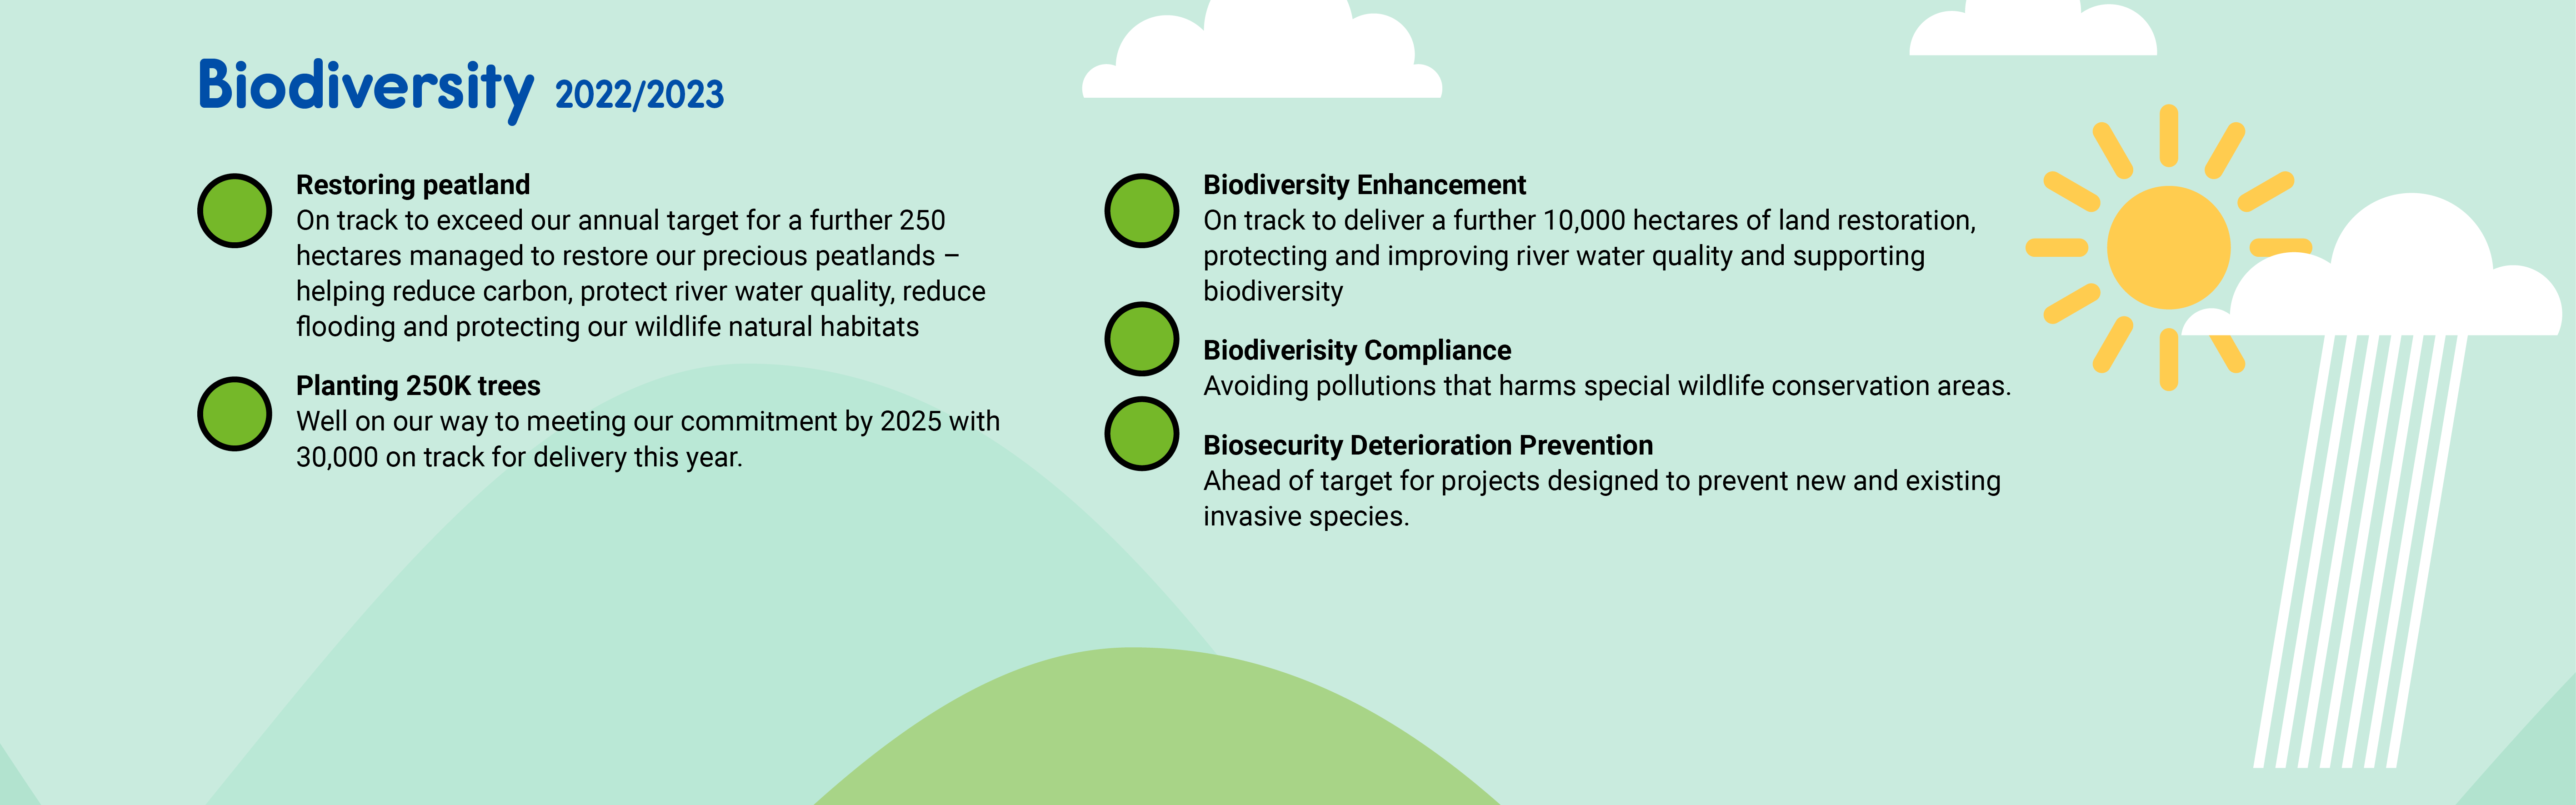 AB22-J10563_SWW_EP Infographic_v06_Section2_Biodiversity.png